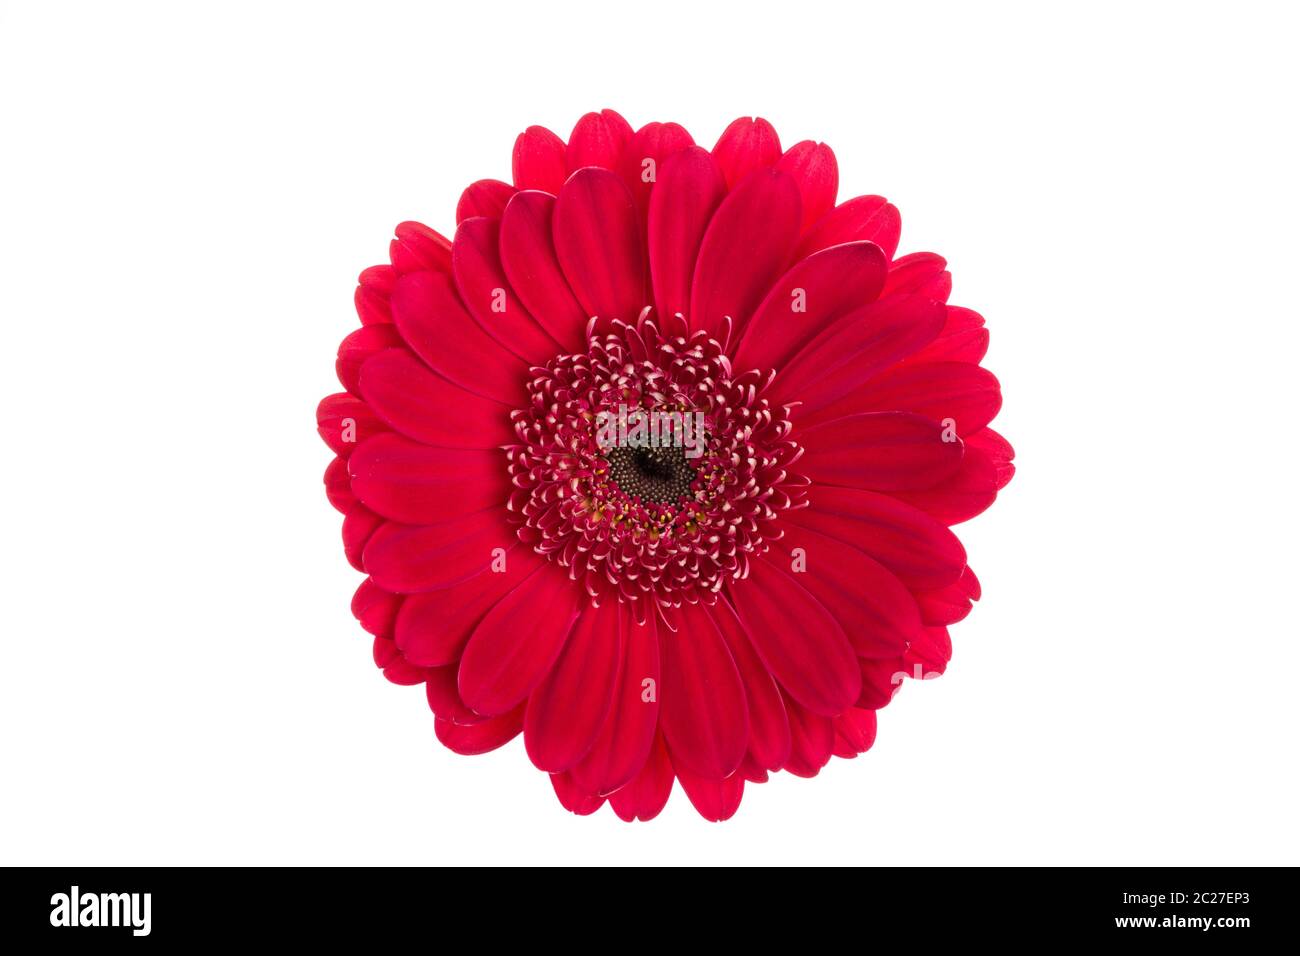 Perfect red gerbera flower head isolated on white background. Stock Photo